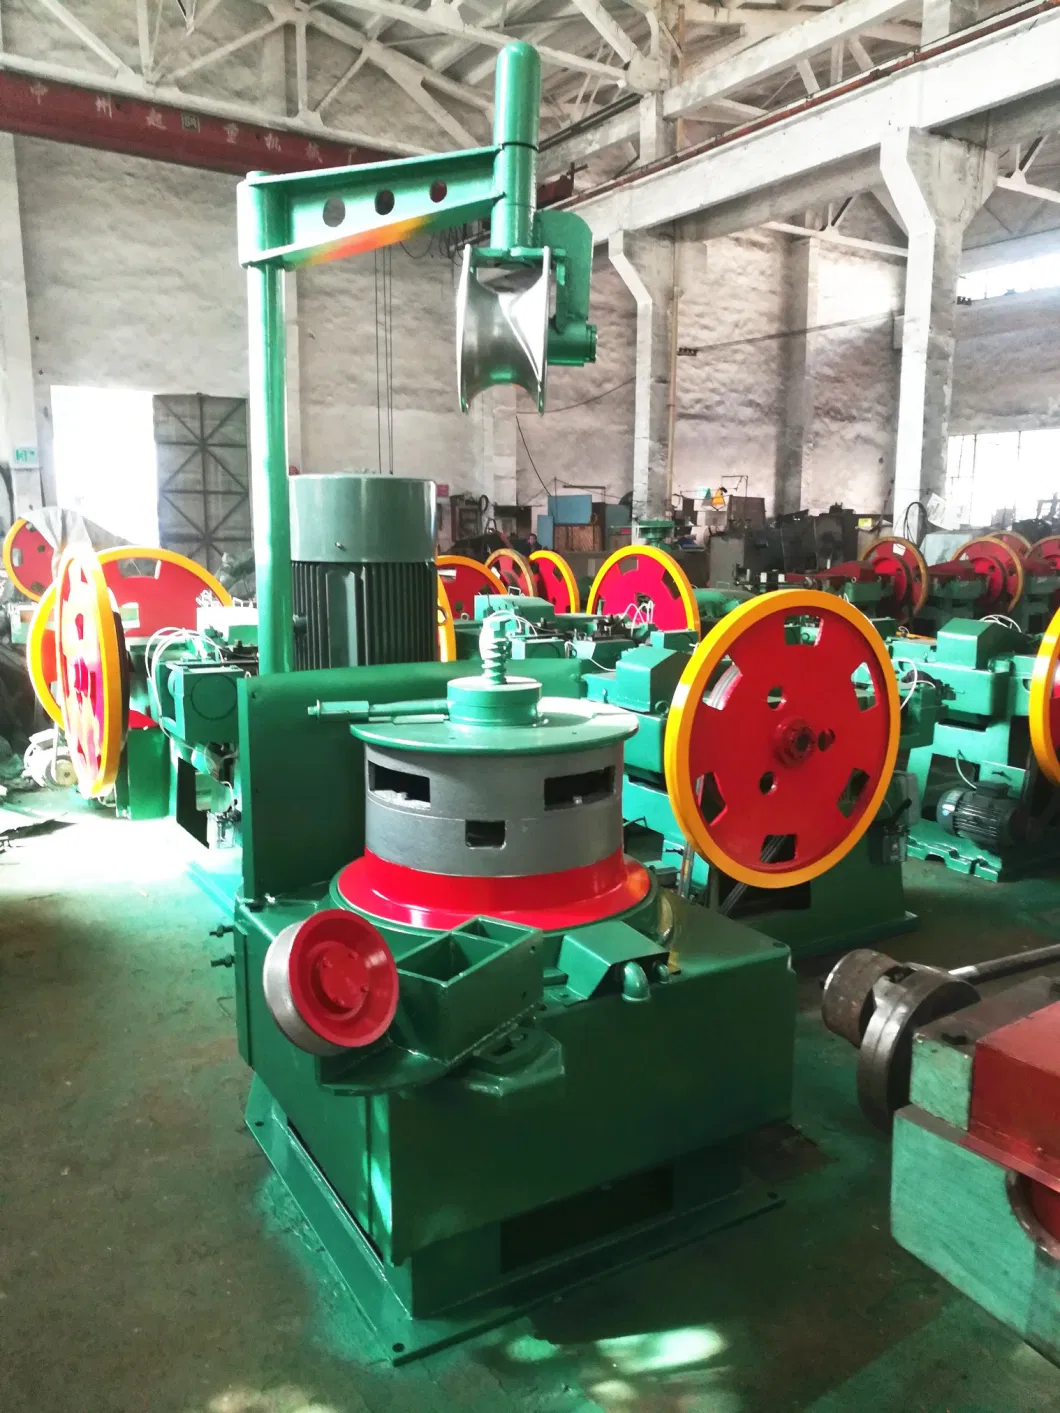 Wire Descaling Machine and Wire Pointing Machine for Drawing Plant